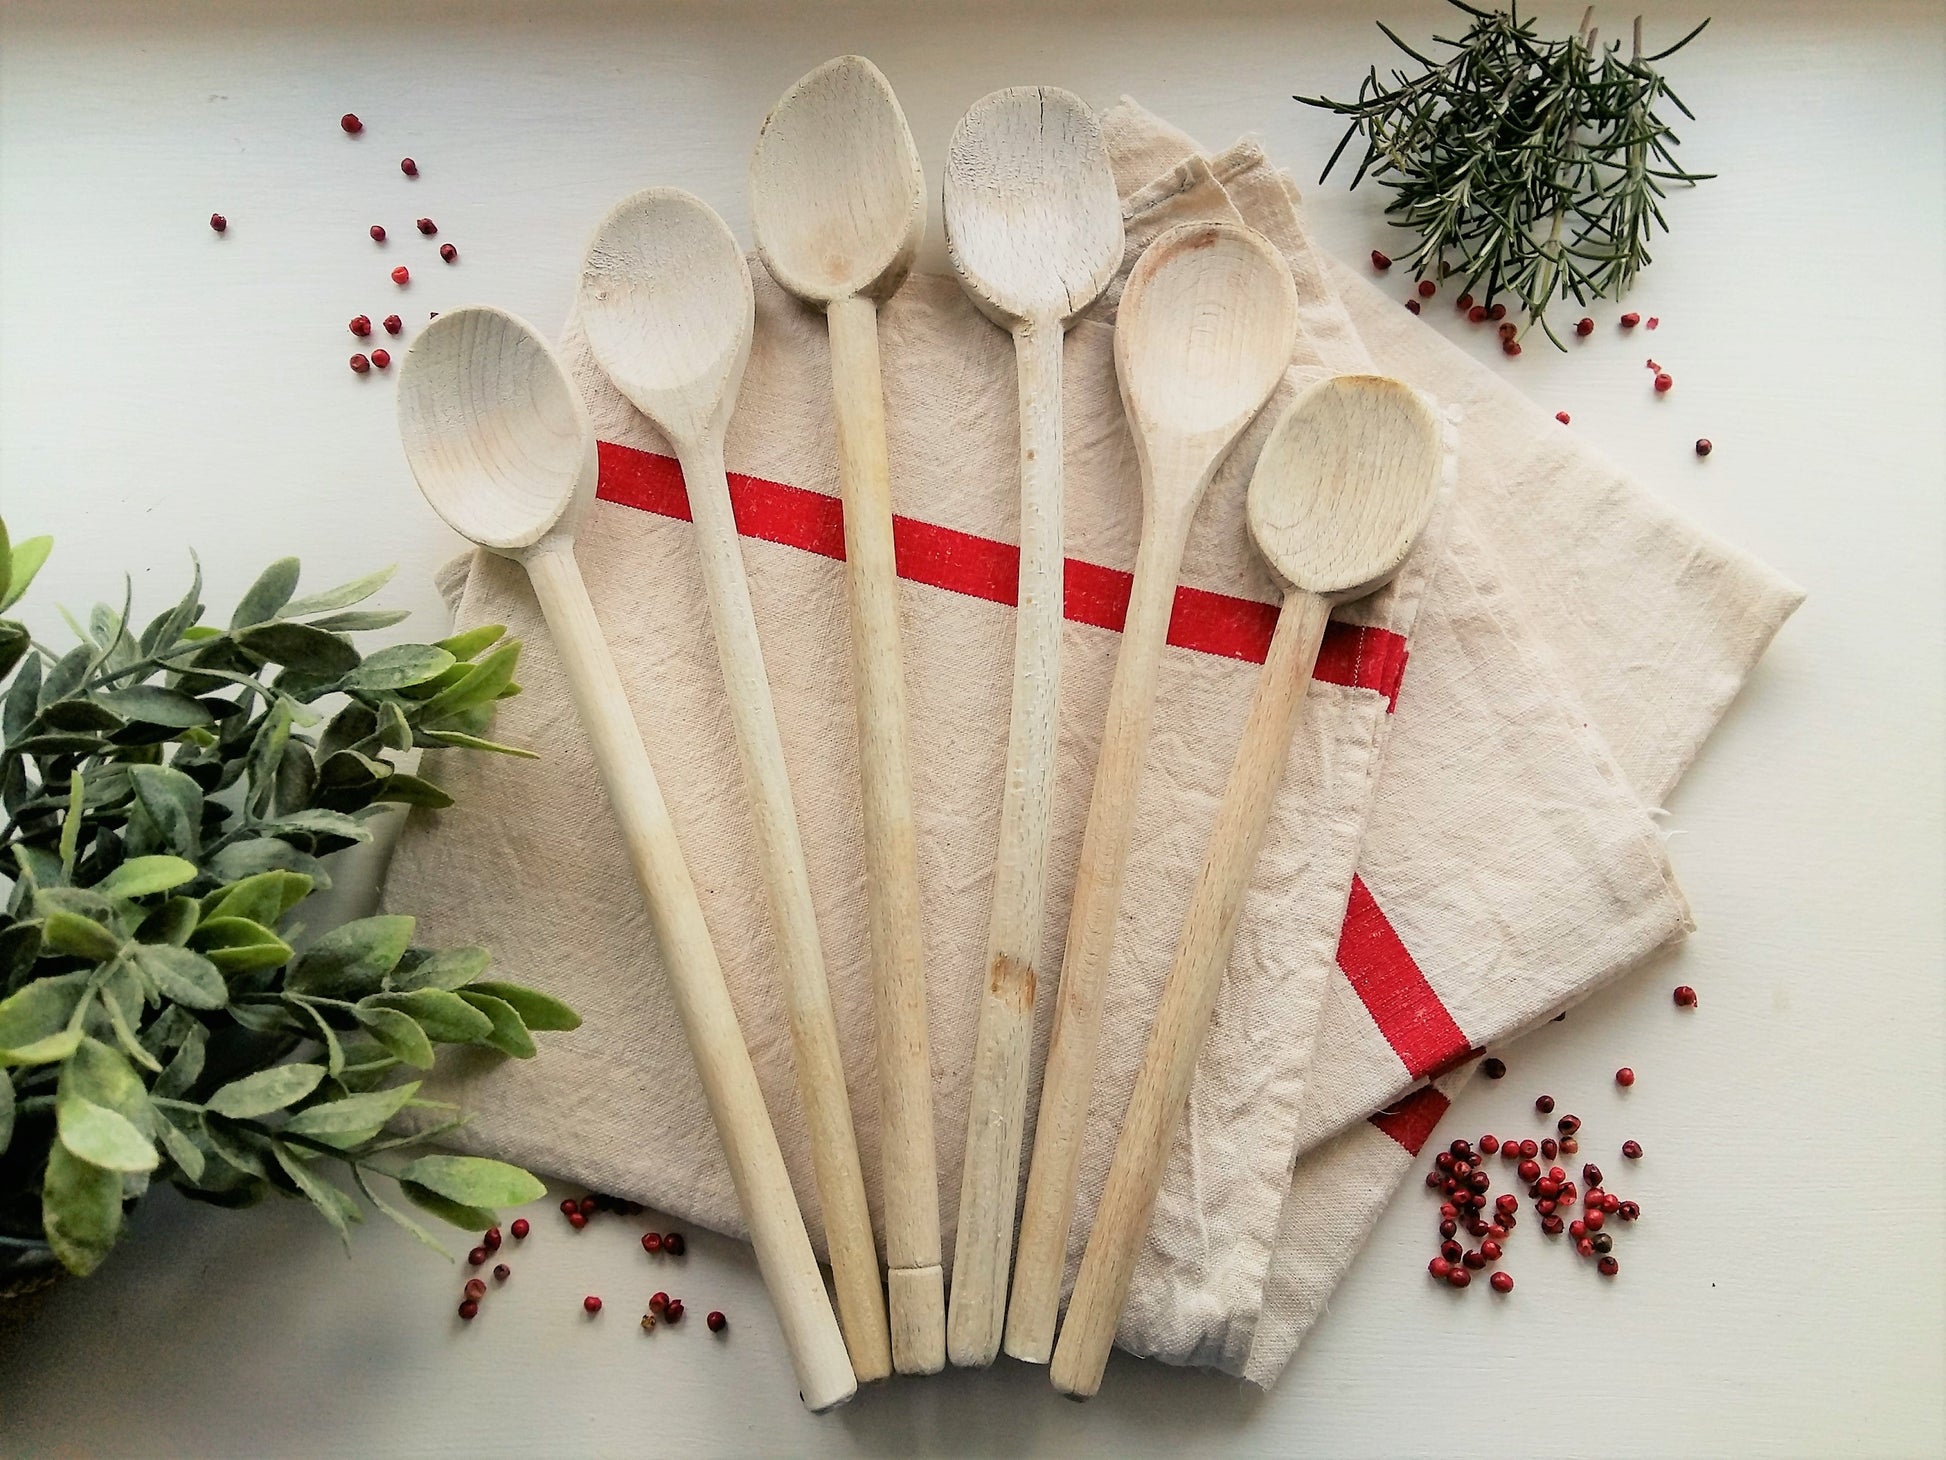 Set of SIX Vintage Bleached Long Wooden Spoons. from Tiggy & Pip - €54.00! Shop now at Tiggy and Pip